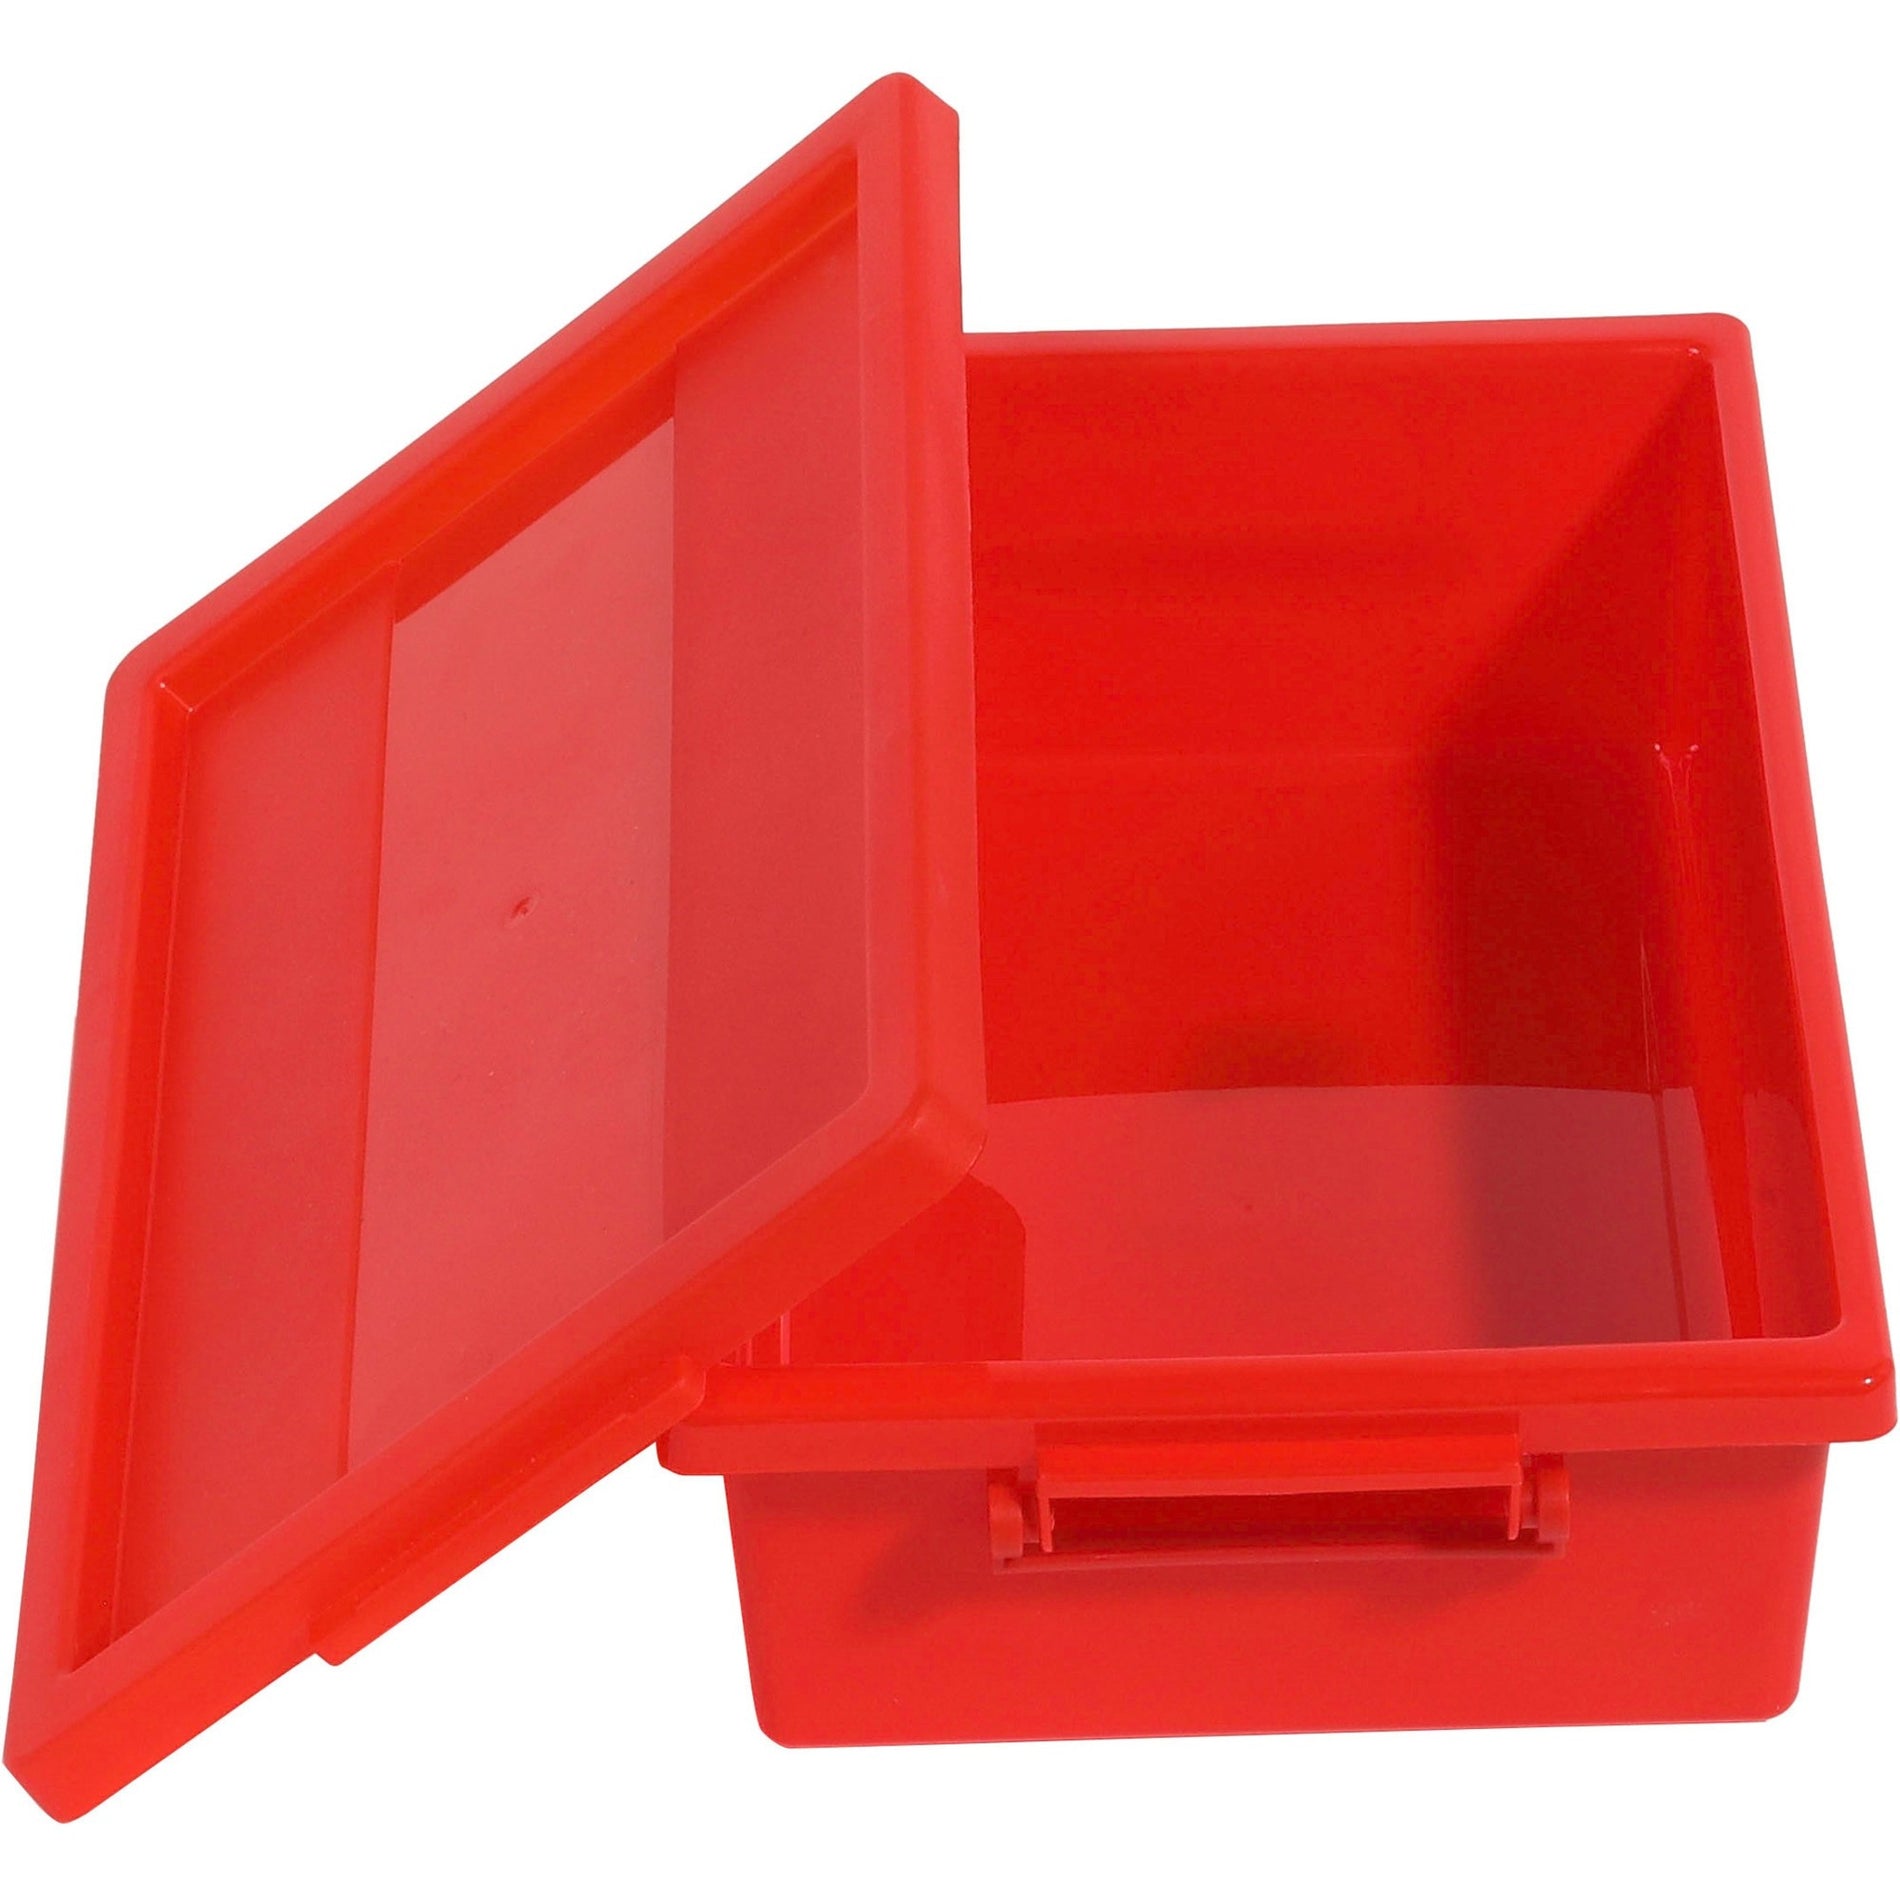 Deflecto Little Artist Antimicrobial Storage Tote - Lightweight, Durable, Red [Discontinued]